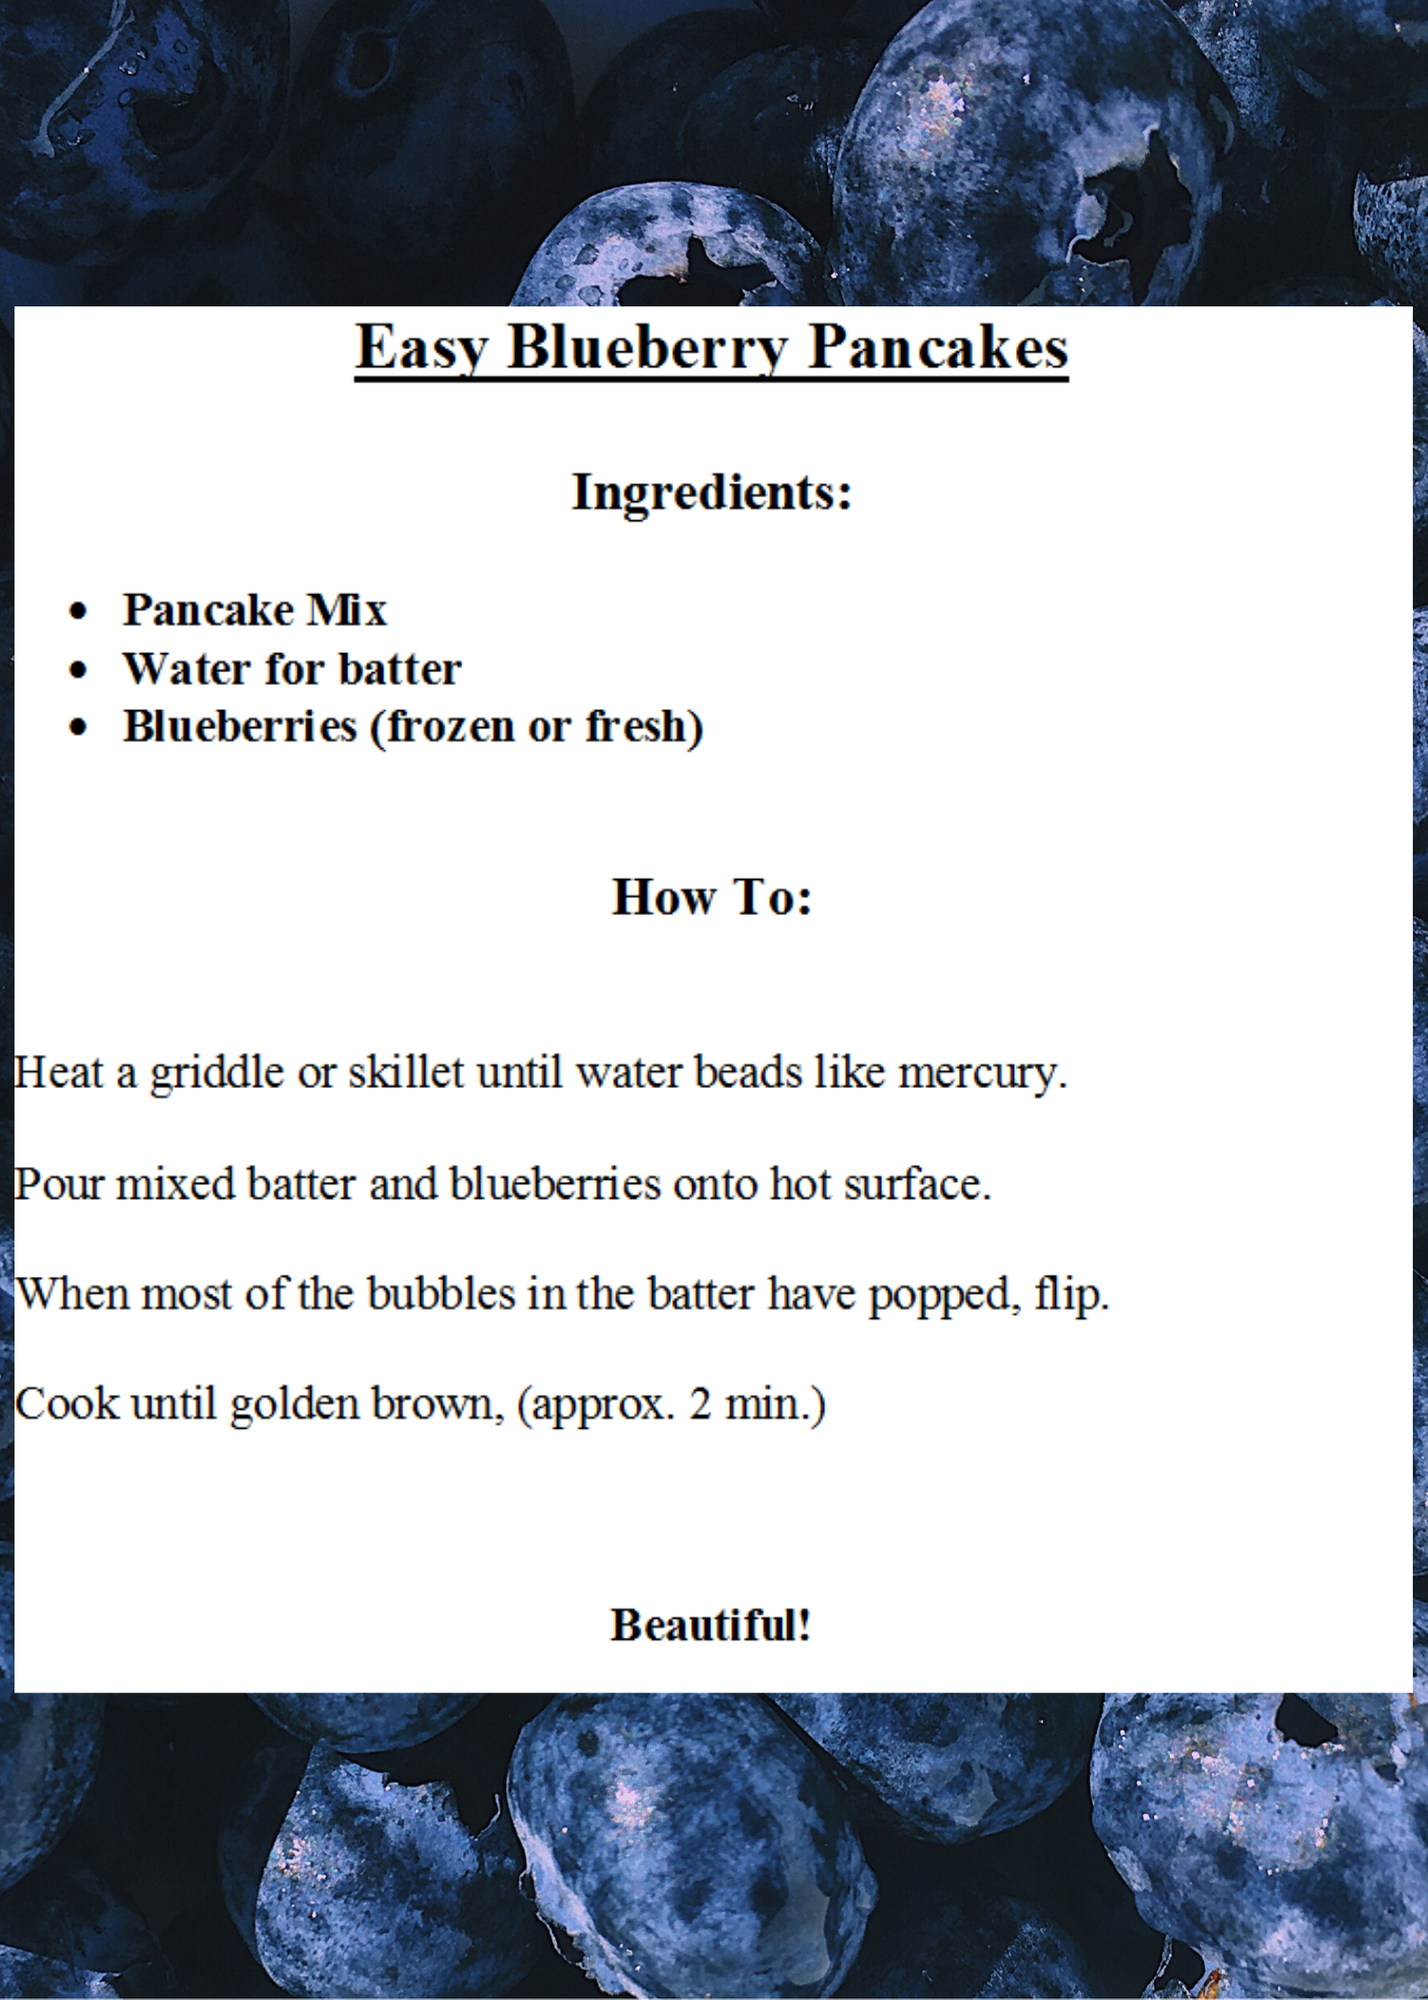 blueberry Pancakes 5.16.20.png